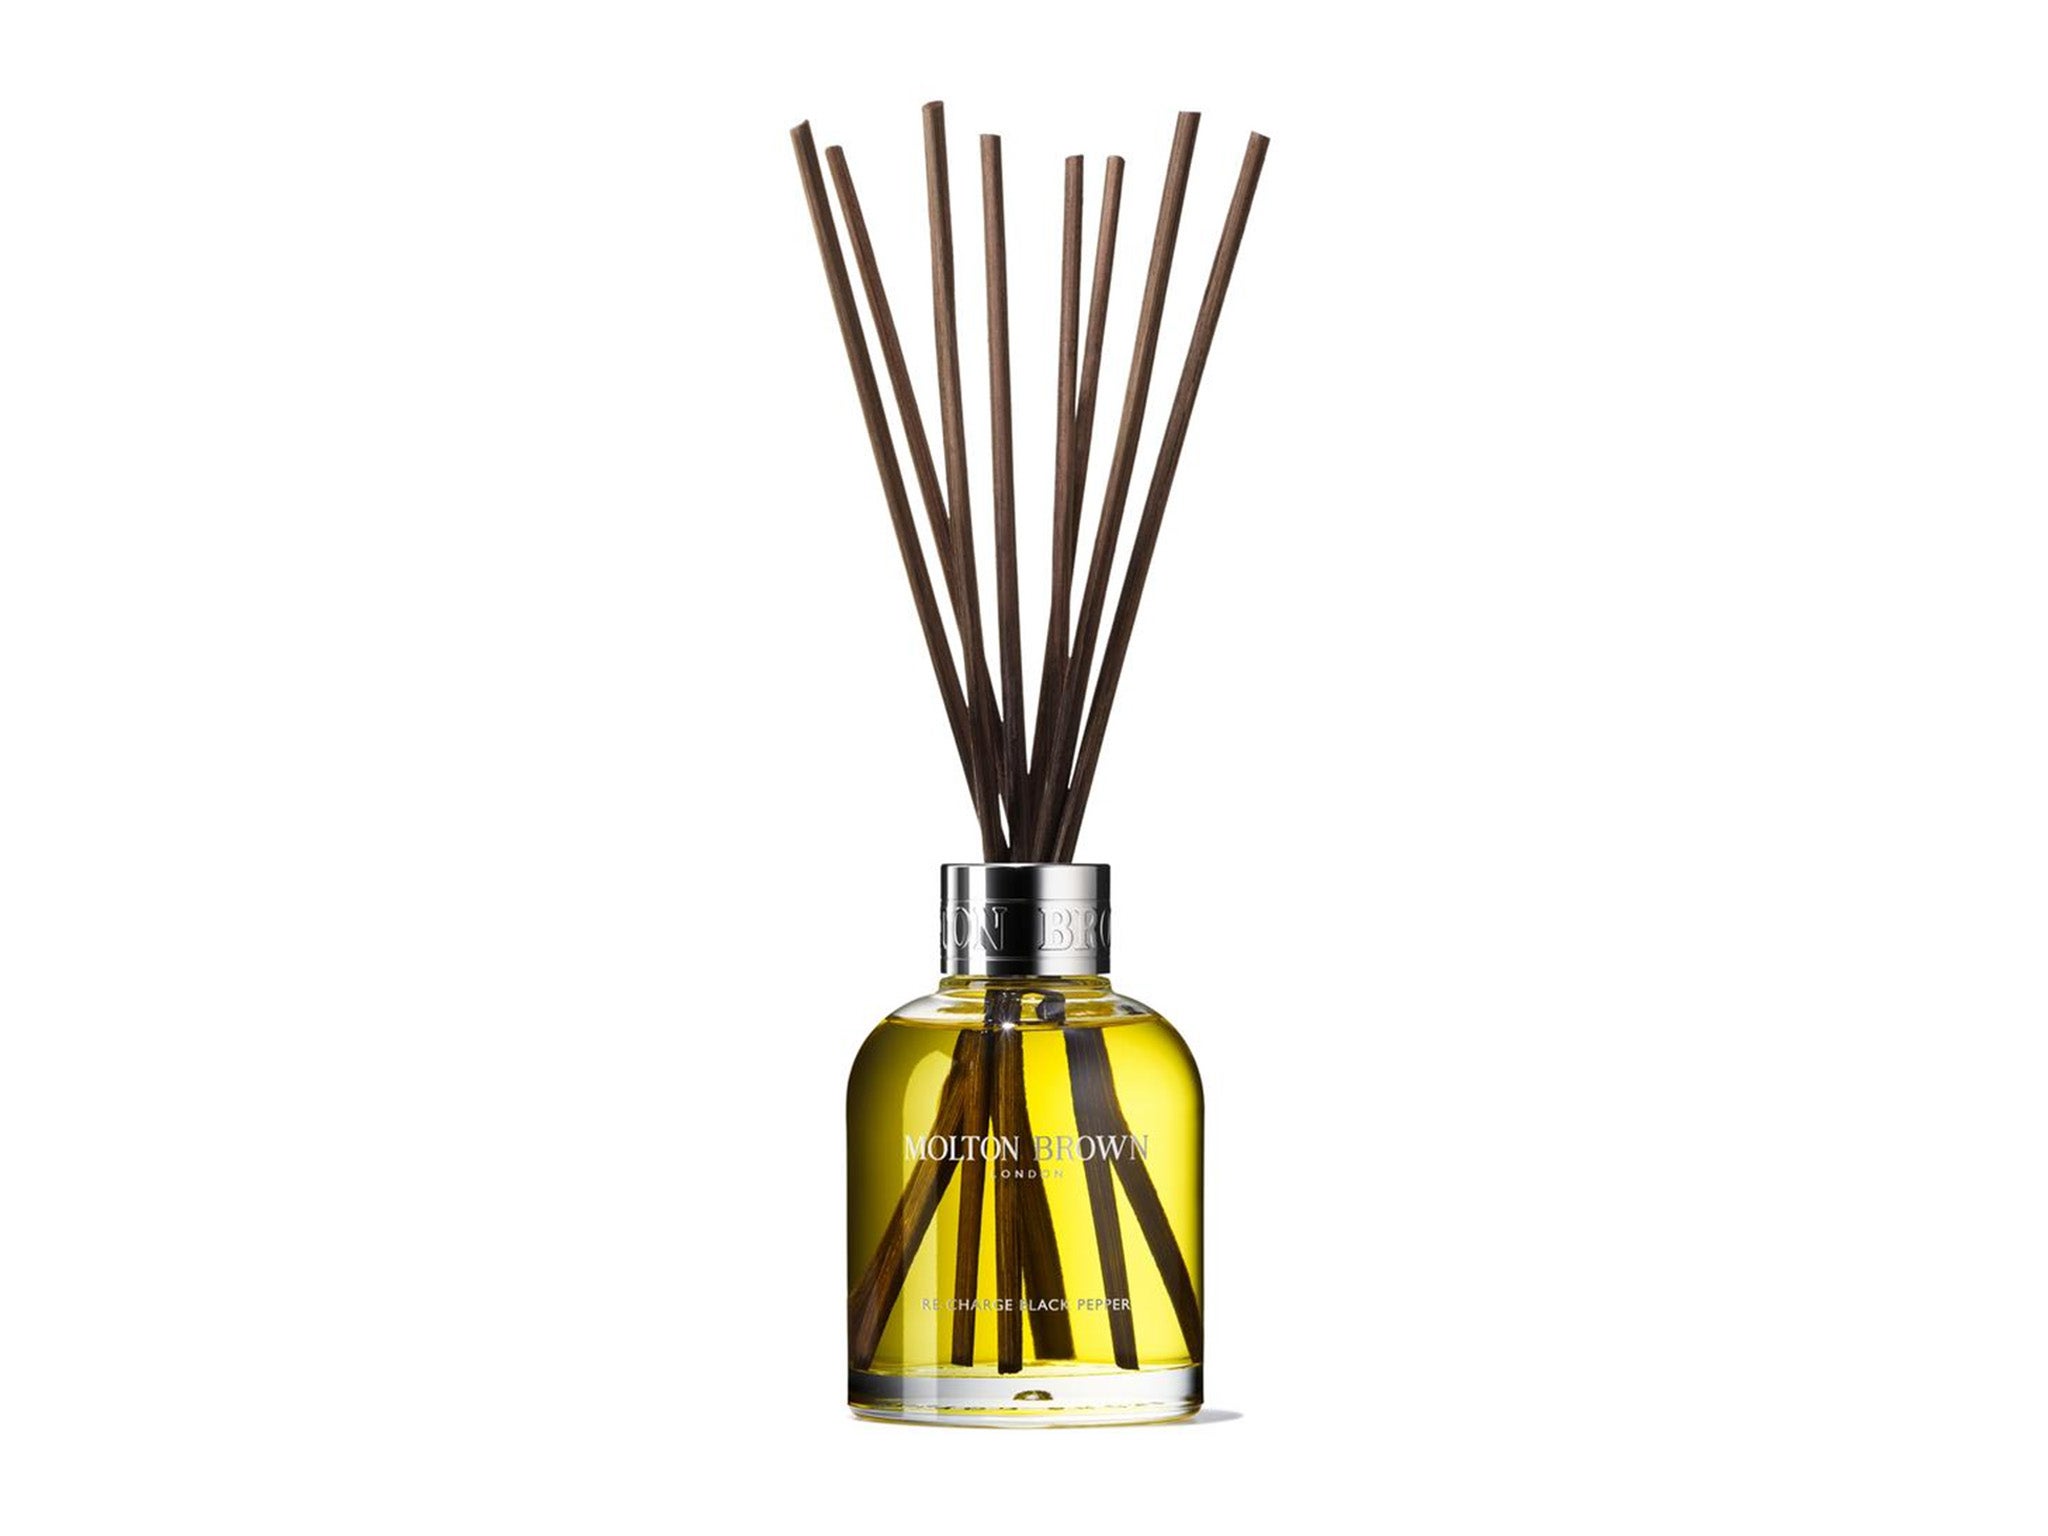 Molton Brown re-charge black pepper aroma reeds diffuser, 150ml